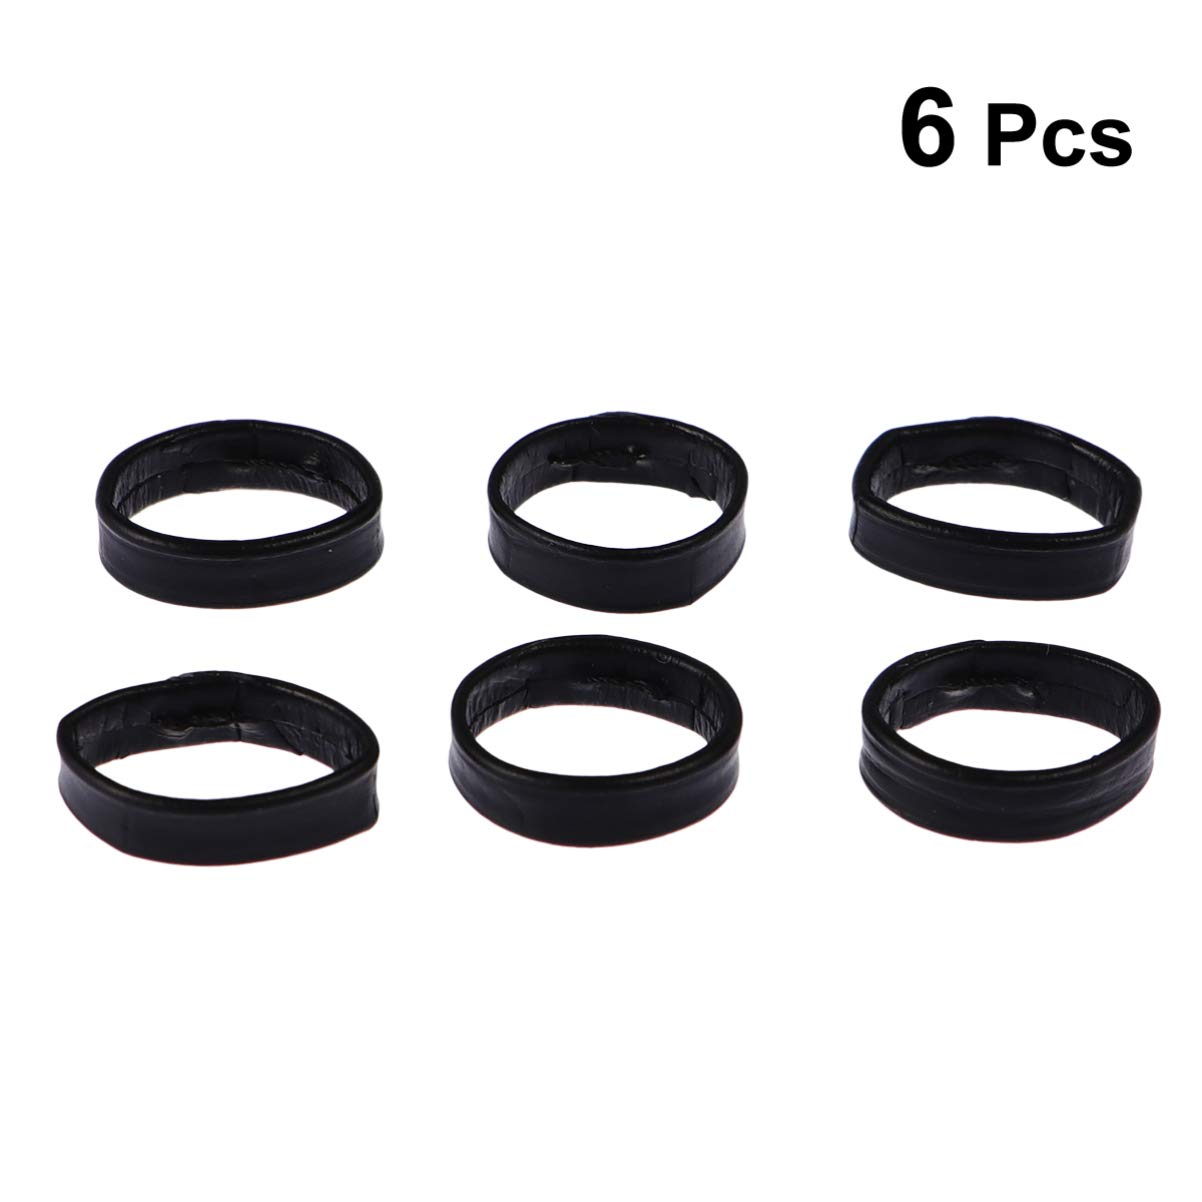 Hemobllo 6pcs Leather Watch Strap Loop Band Holder 18mm Leather Watch Keeper Retainer Ring Replacement Watch Repair Supplies Black